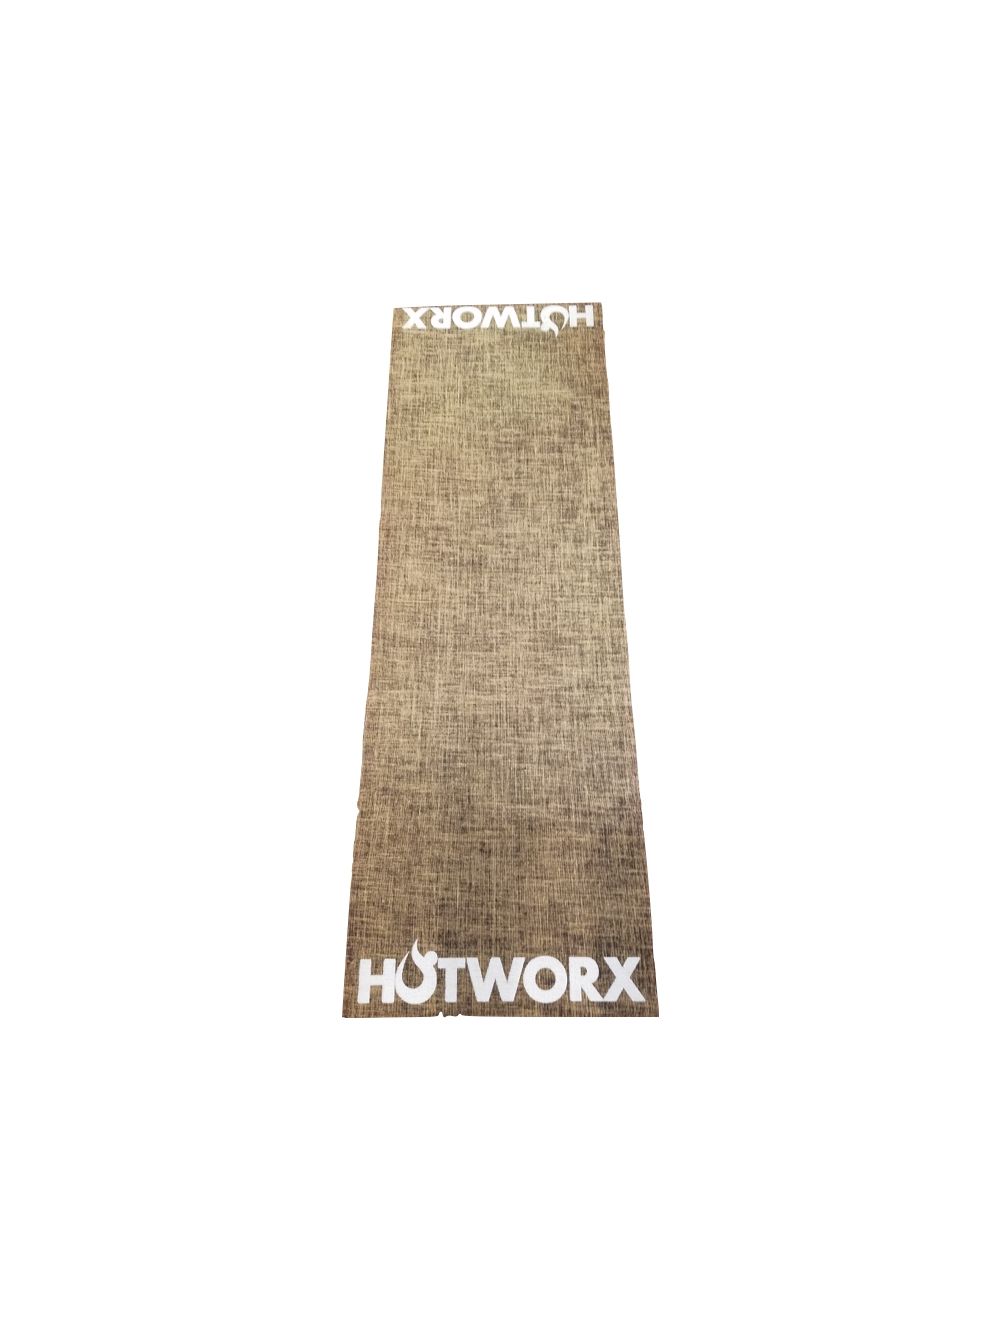 Do you clean your HOTWORX mat? Come see us for a Yoga Mat cleaner